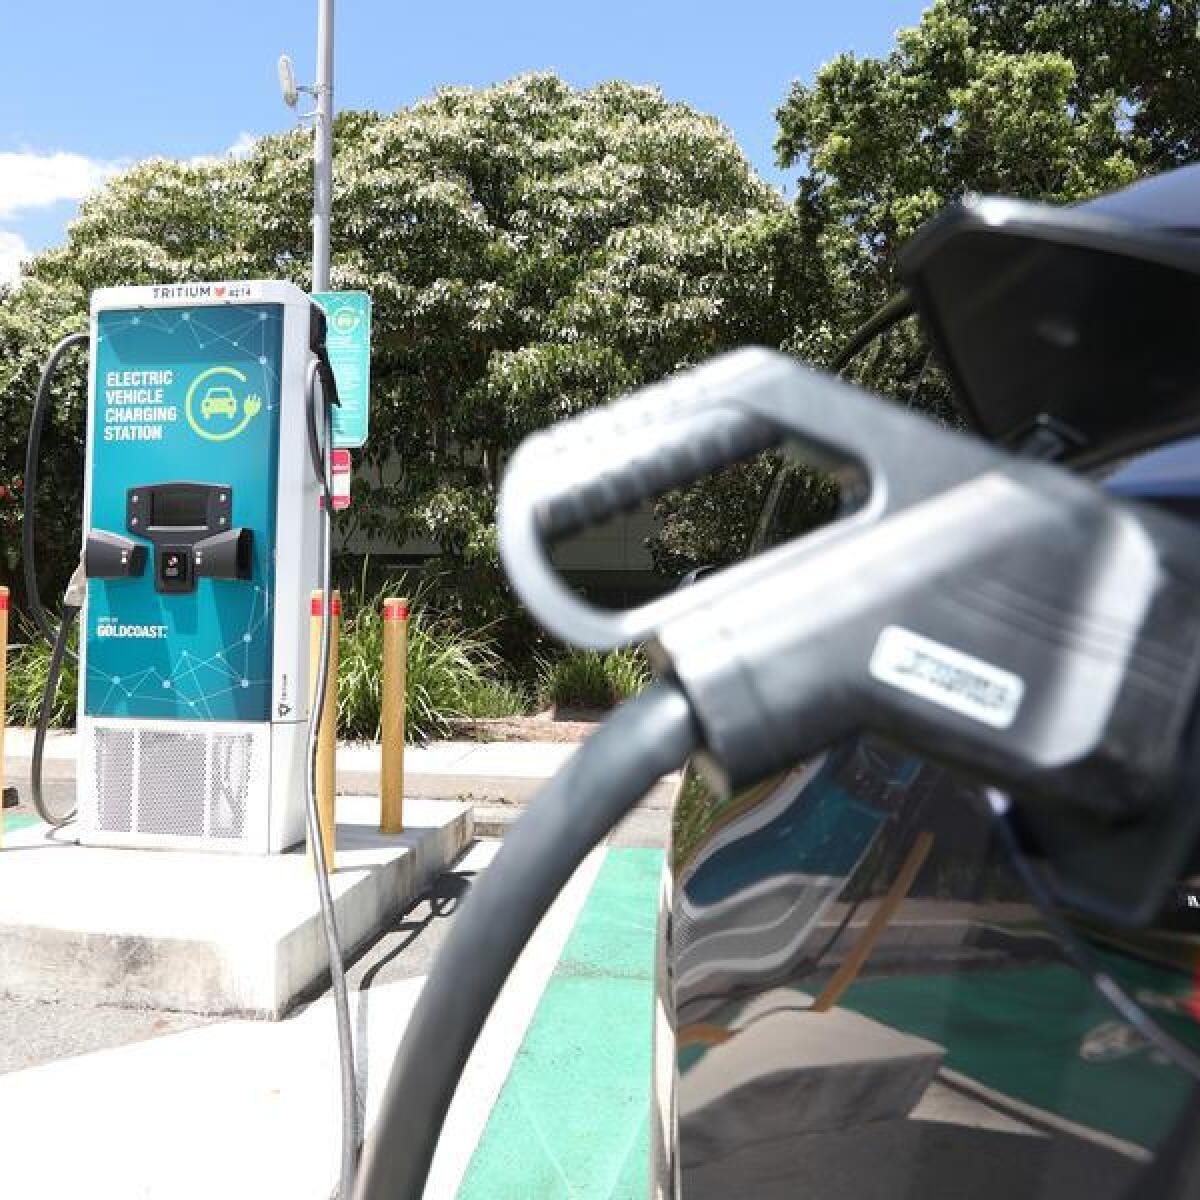 An electric vehicle charging station at Bundall on the Gold Coast